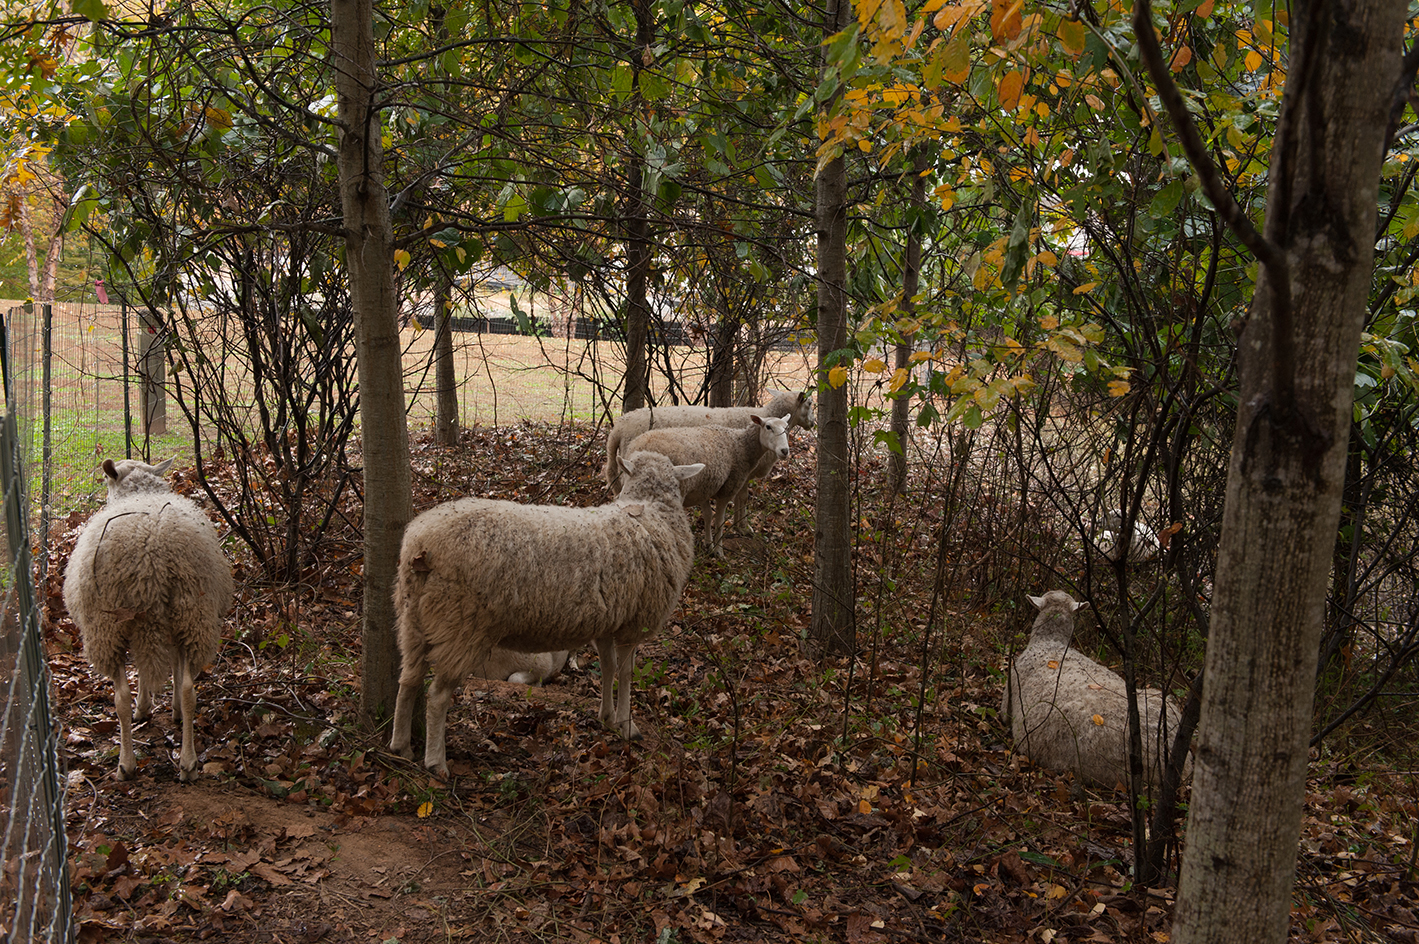 Sheep are helping clean up kudzu in an area north of the BioTech Quad.